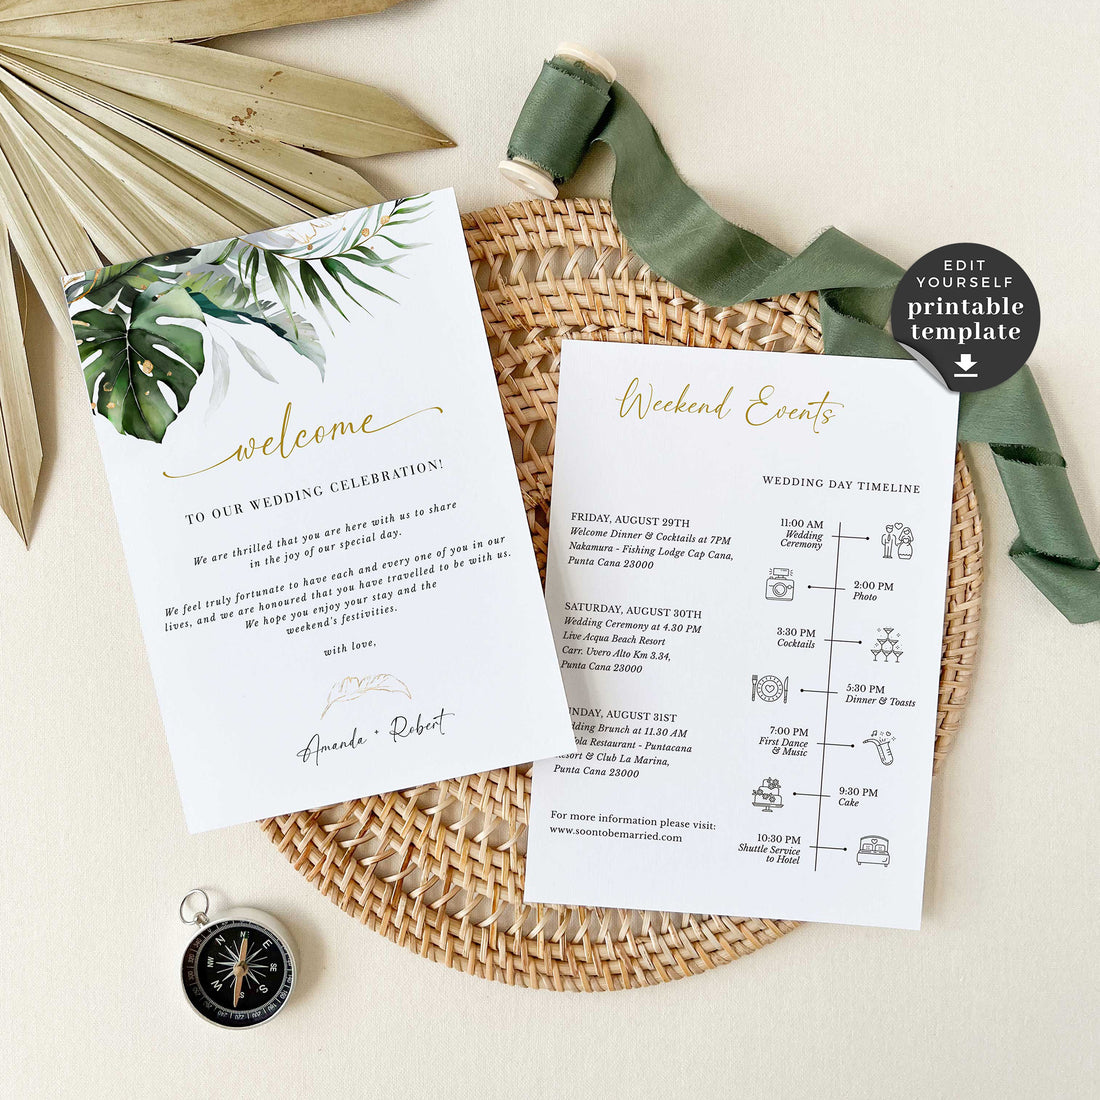 Personalized Wedding Welcome Letter & Itinerary - Floral